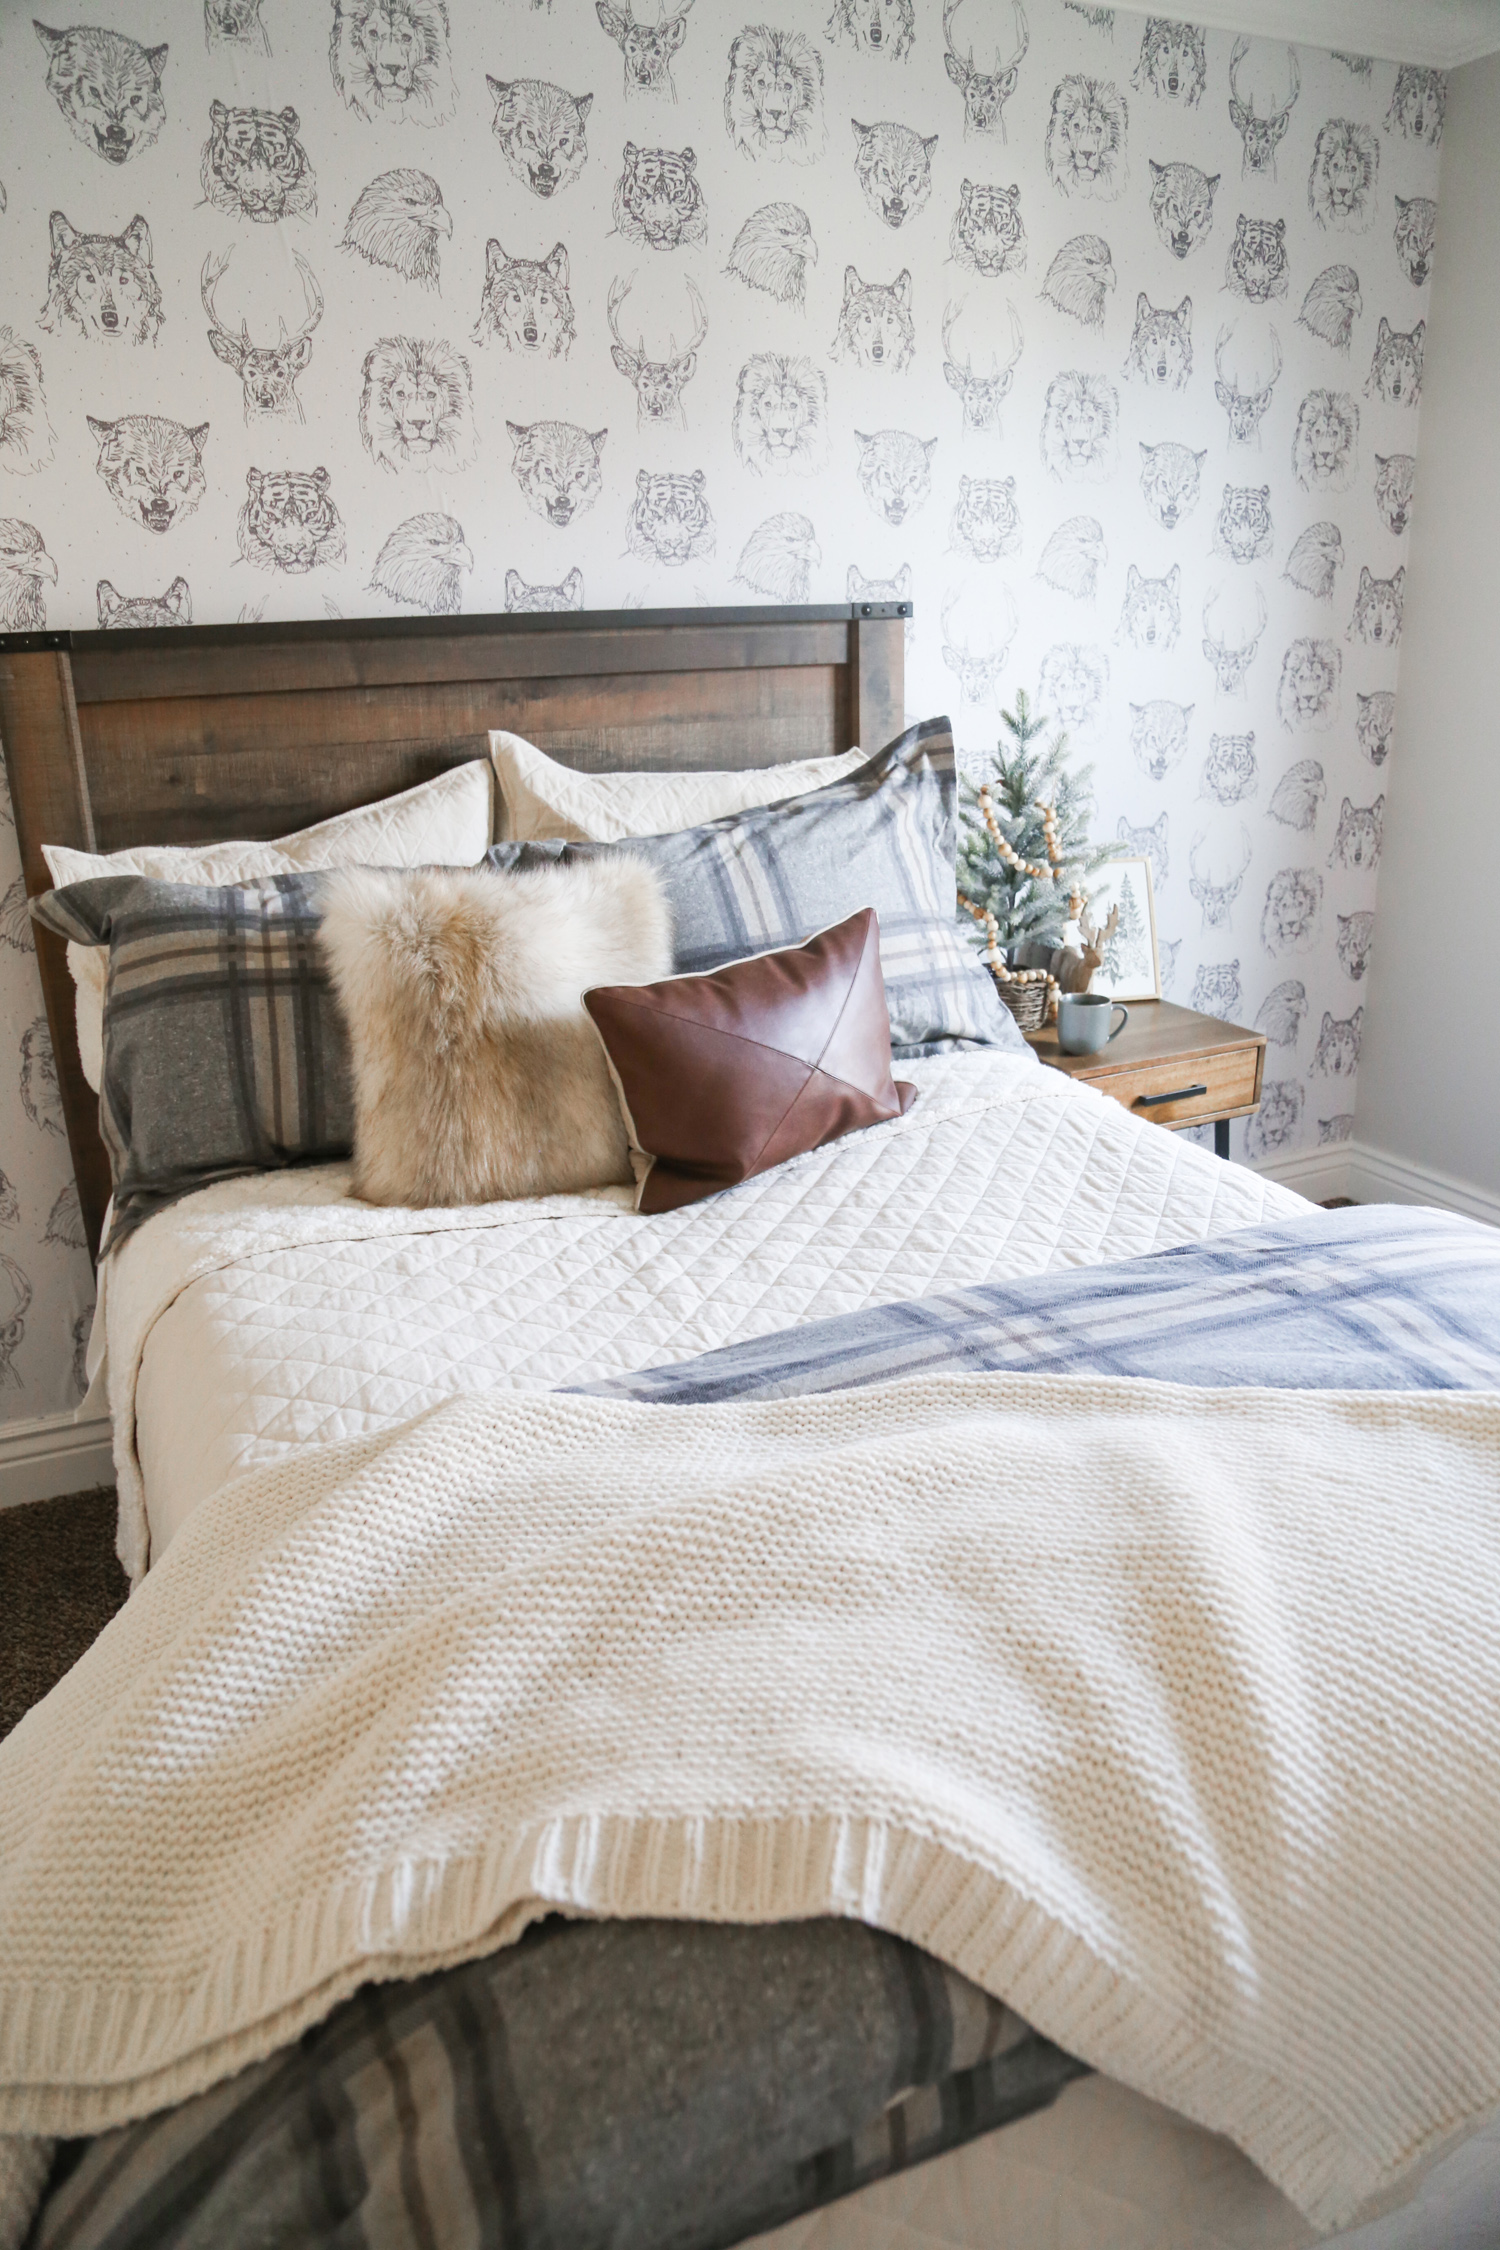 Boys bedroom makeover with Kohls featured by Utah lifestyle blog, By Jen Rose: after